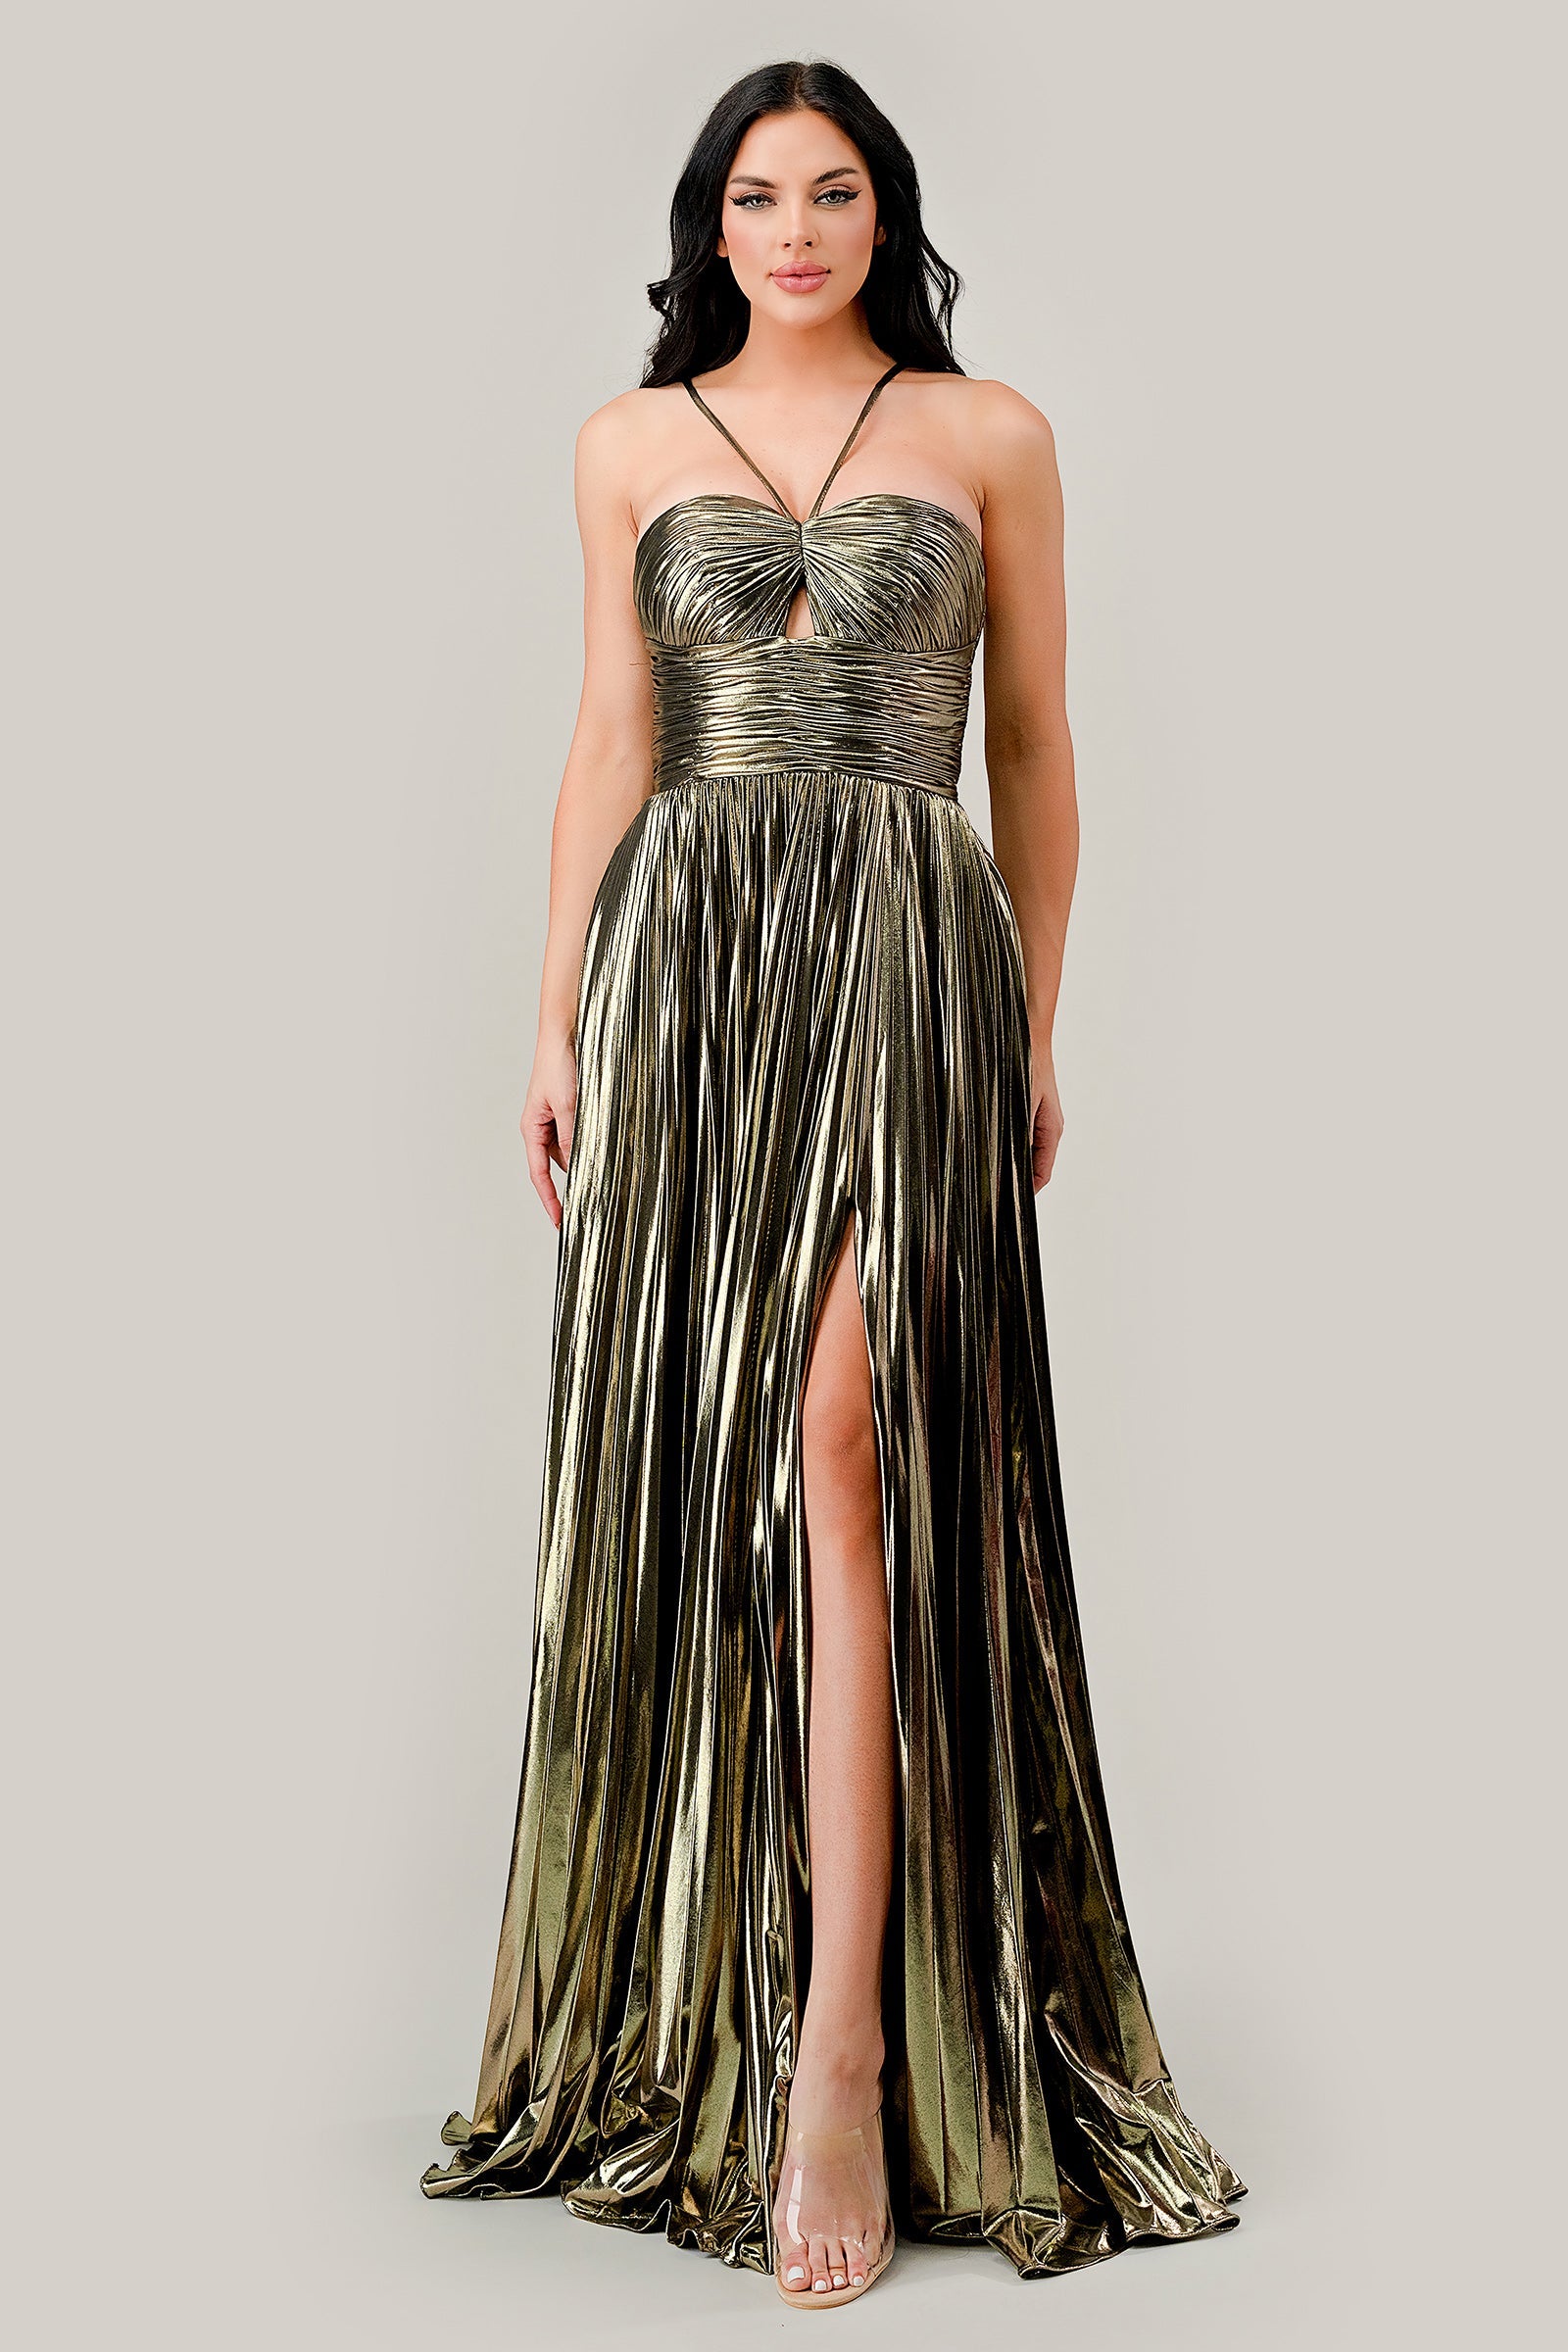 RUE Lame Metallic Shimmer Pleated Halter Neck A Line Prom & Formal Dress